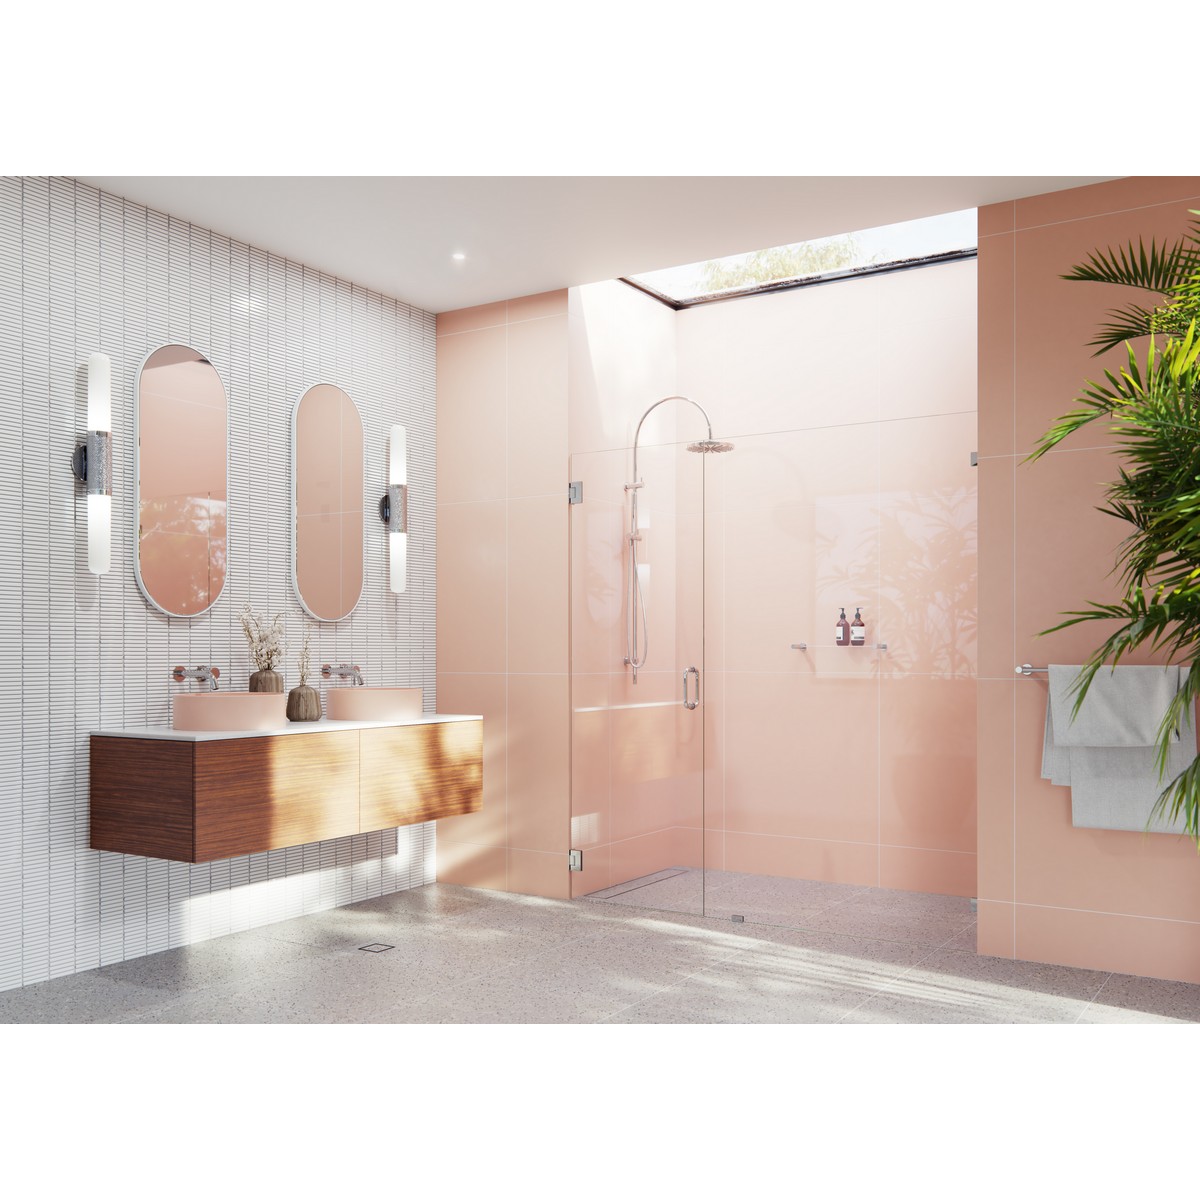 GLASS WAREHOUSE GW-WH-77.25 ILLUME 77 1/4 W X 78 H WALL HINGED FULLY FRAMELESS GLASS SHOWER ENCLOSURE